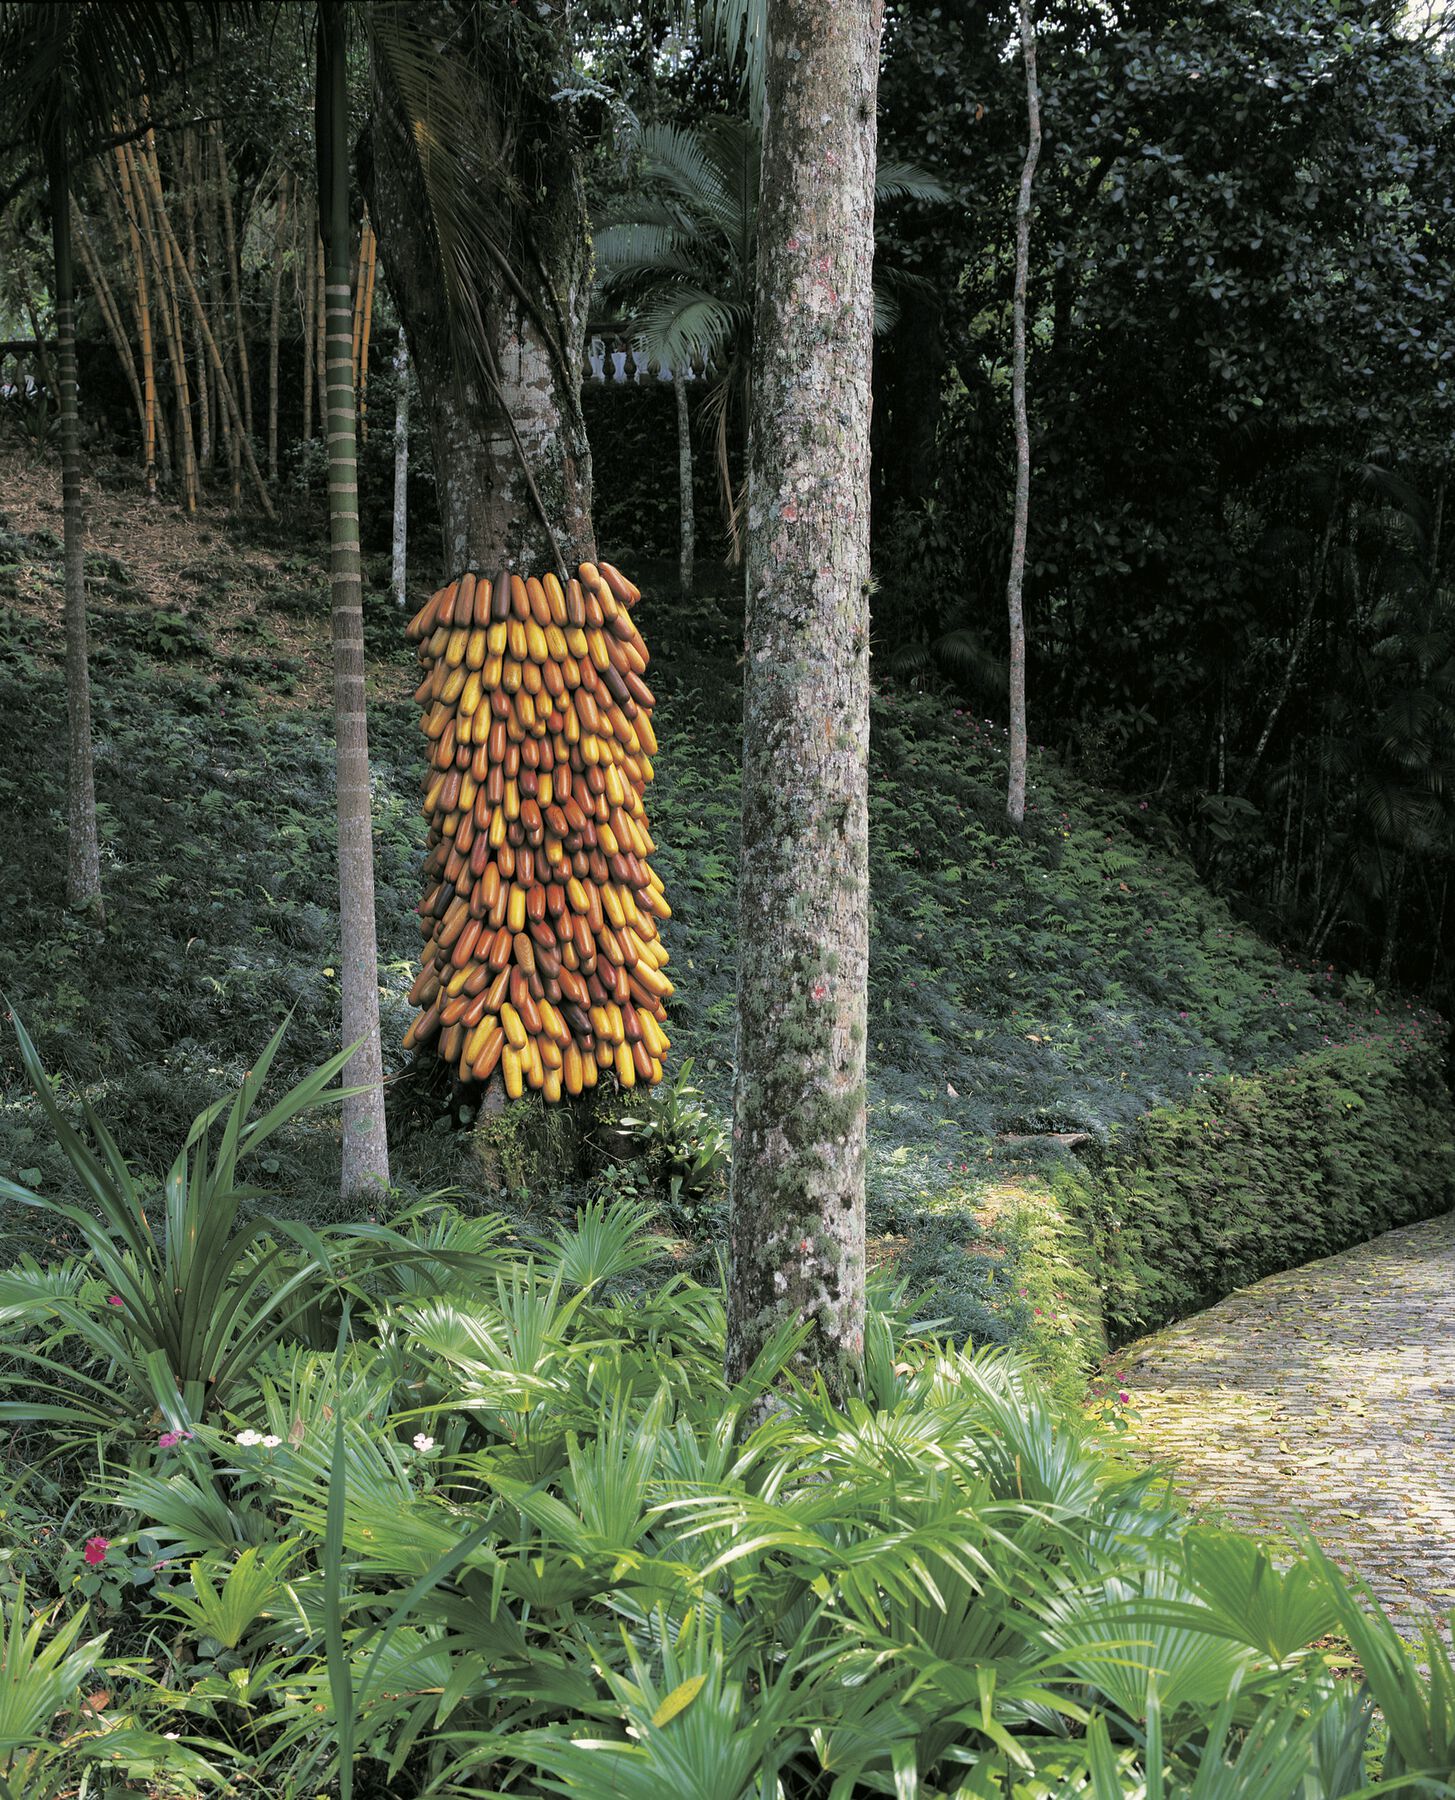 Yellow and orange rolls attached to tree trunk within forest, amidst colorful greenery and plants